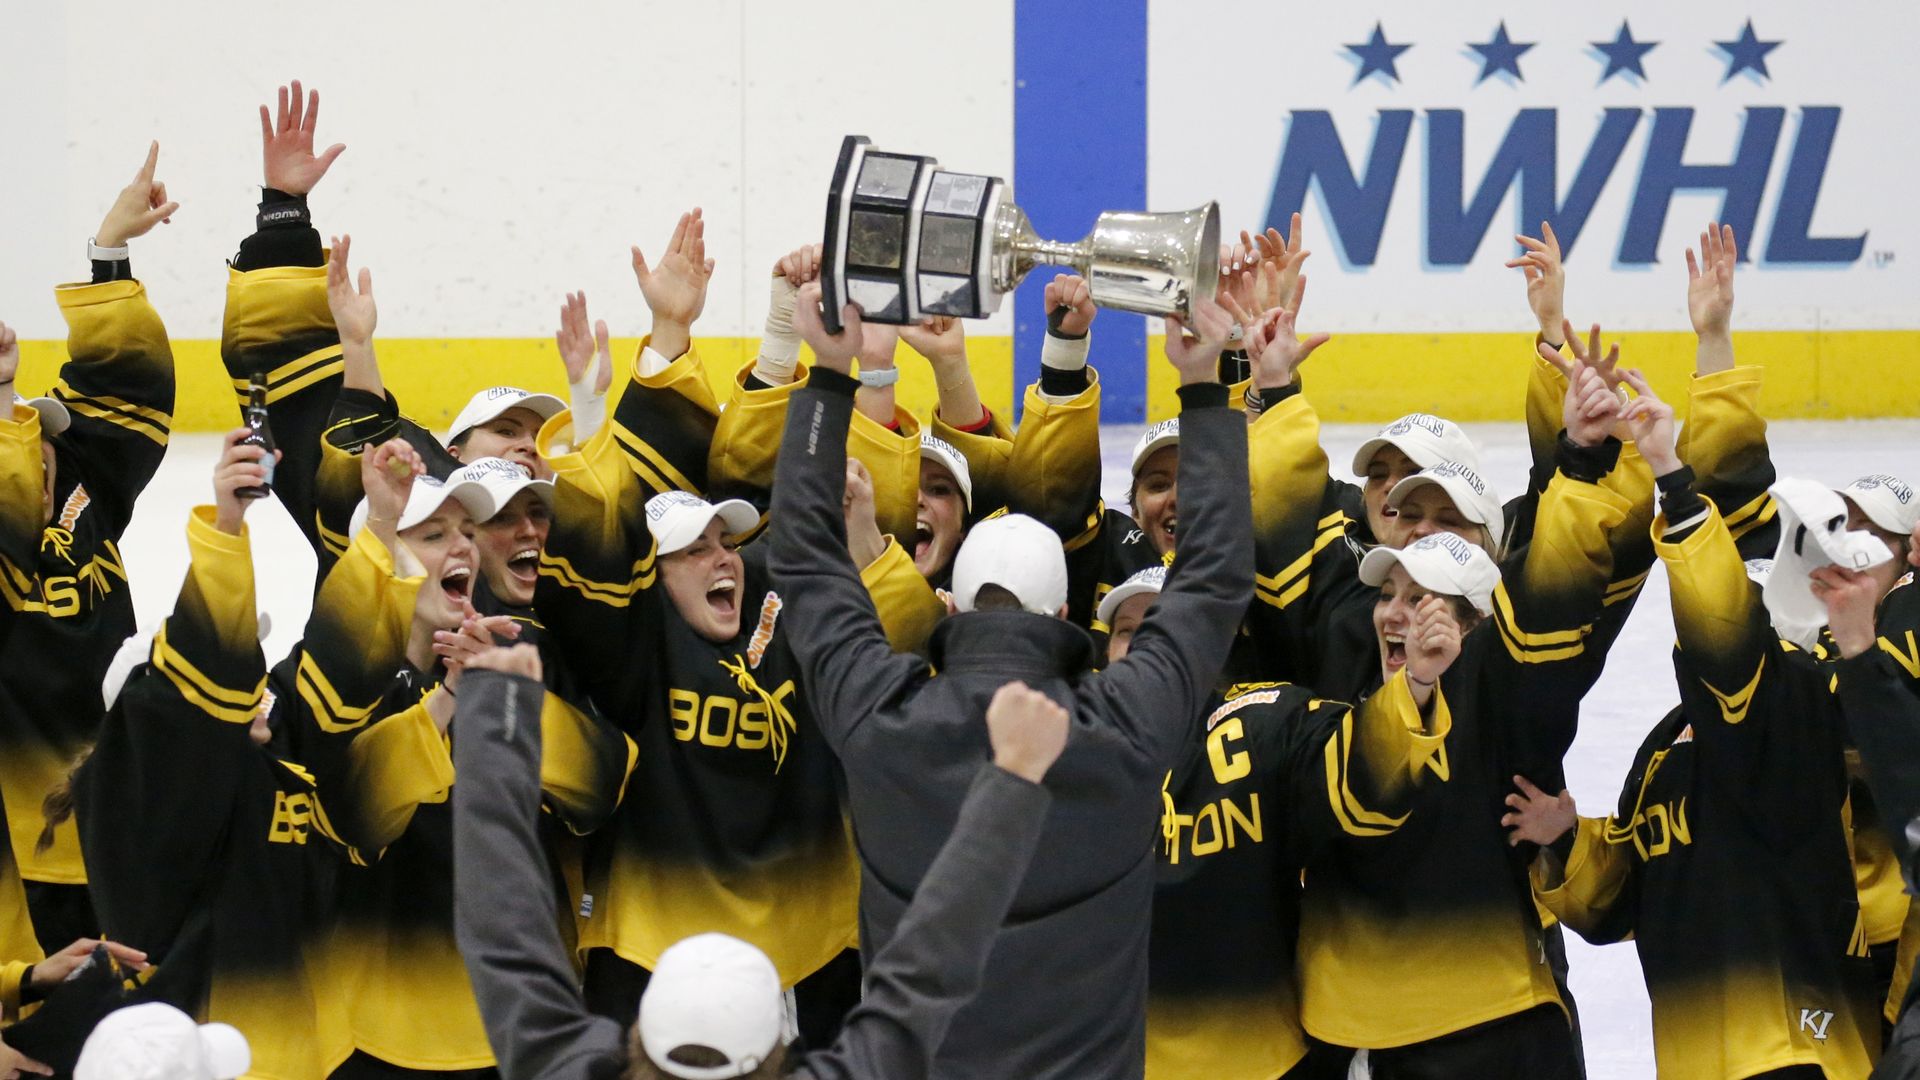 Boston Pride players cheer as coach Paul Mara hoists the NWHL Isobel Cup trophy after the team's win over the Minnesota Whitecaps in the championship hockey game in Boston, Saturday, March 27, 2021